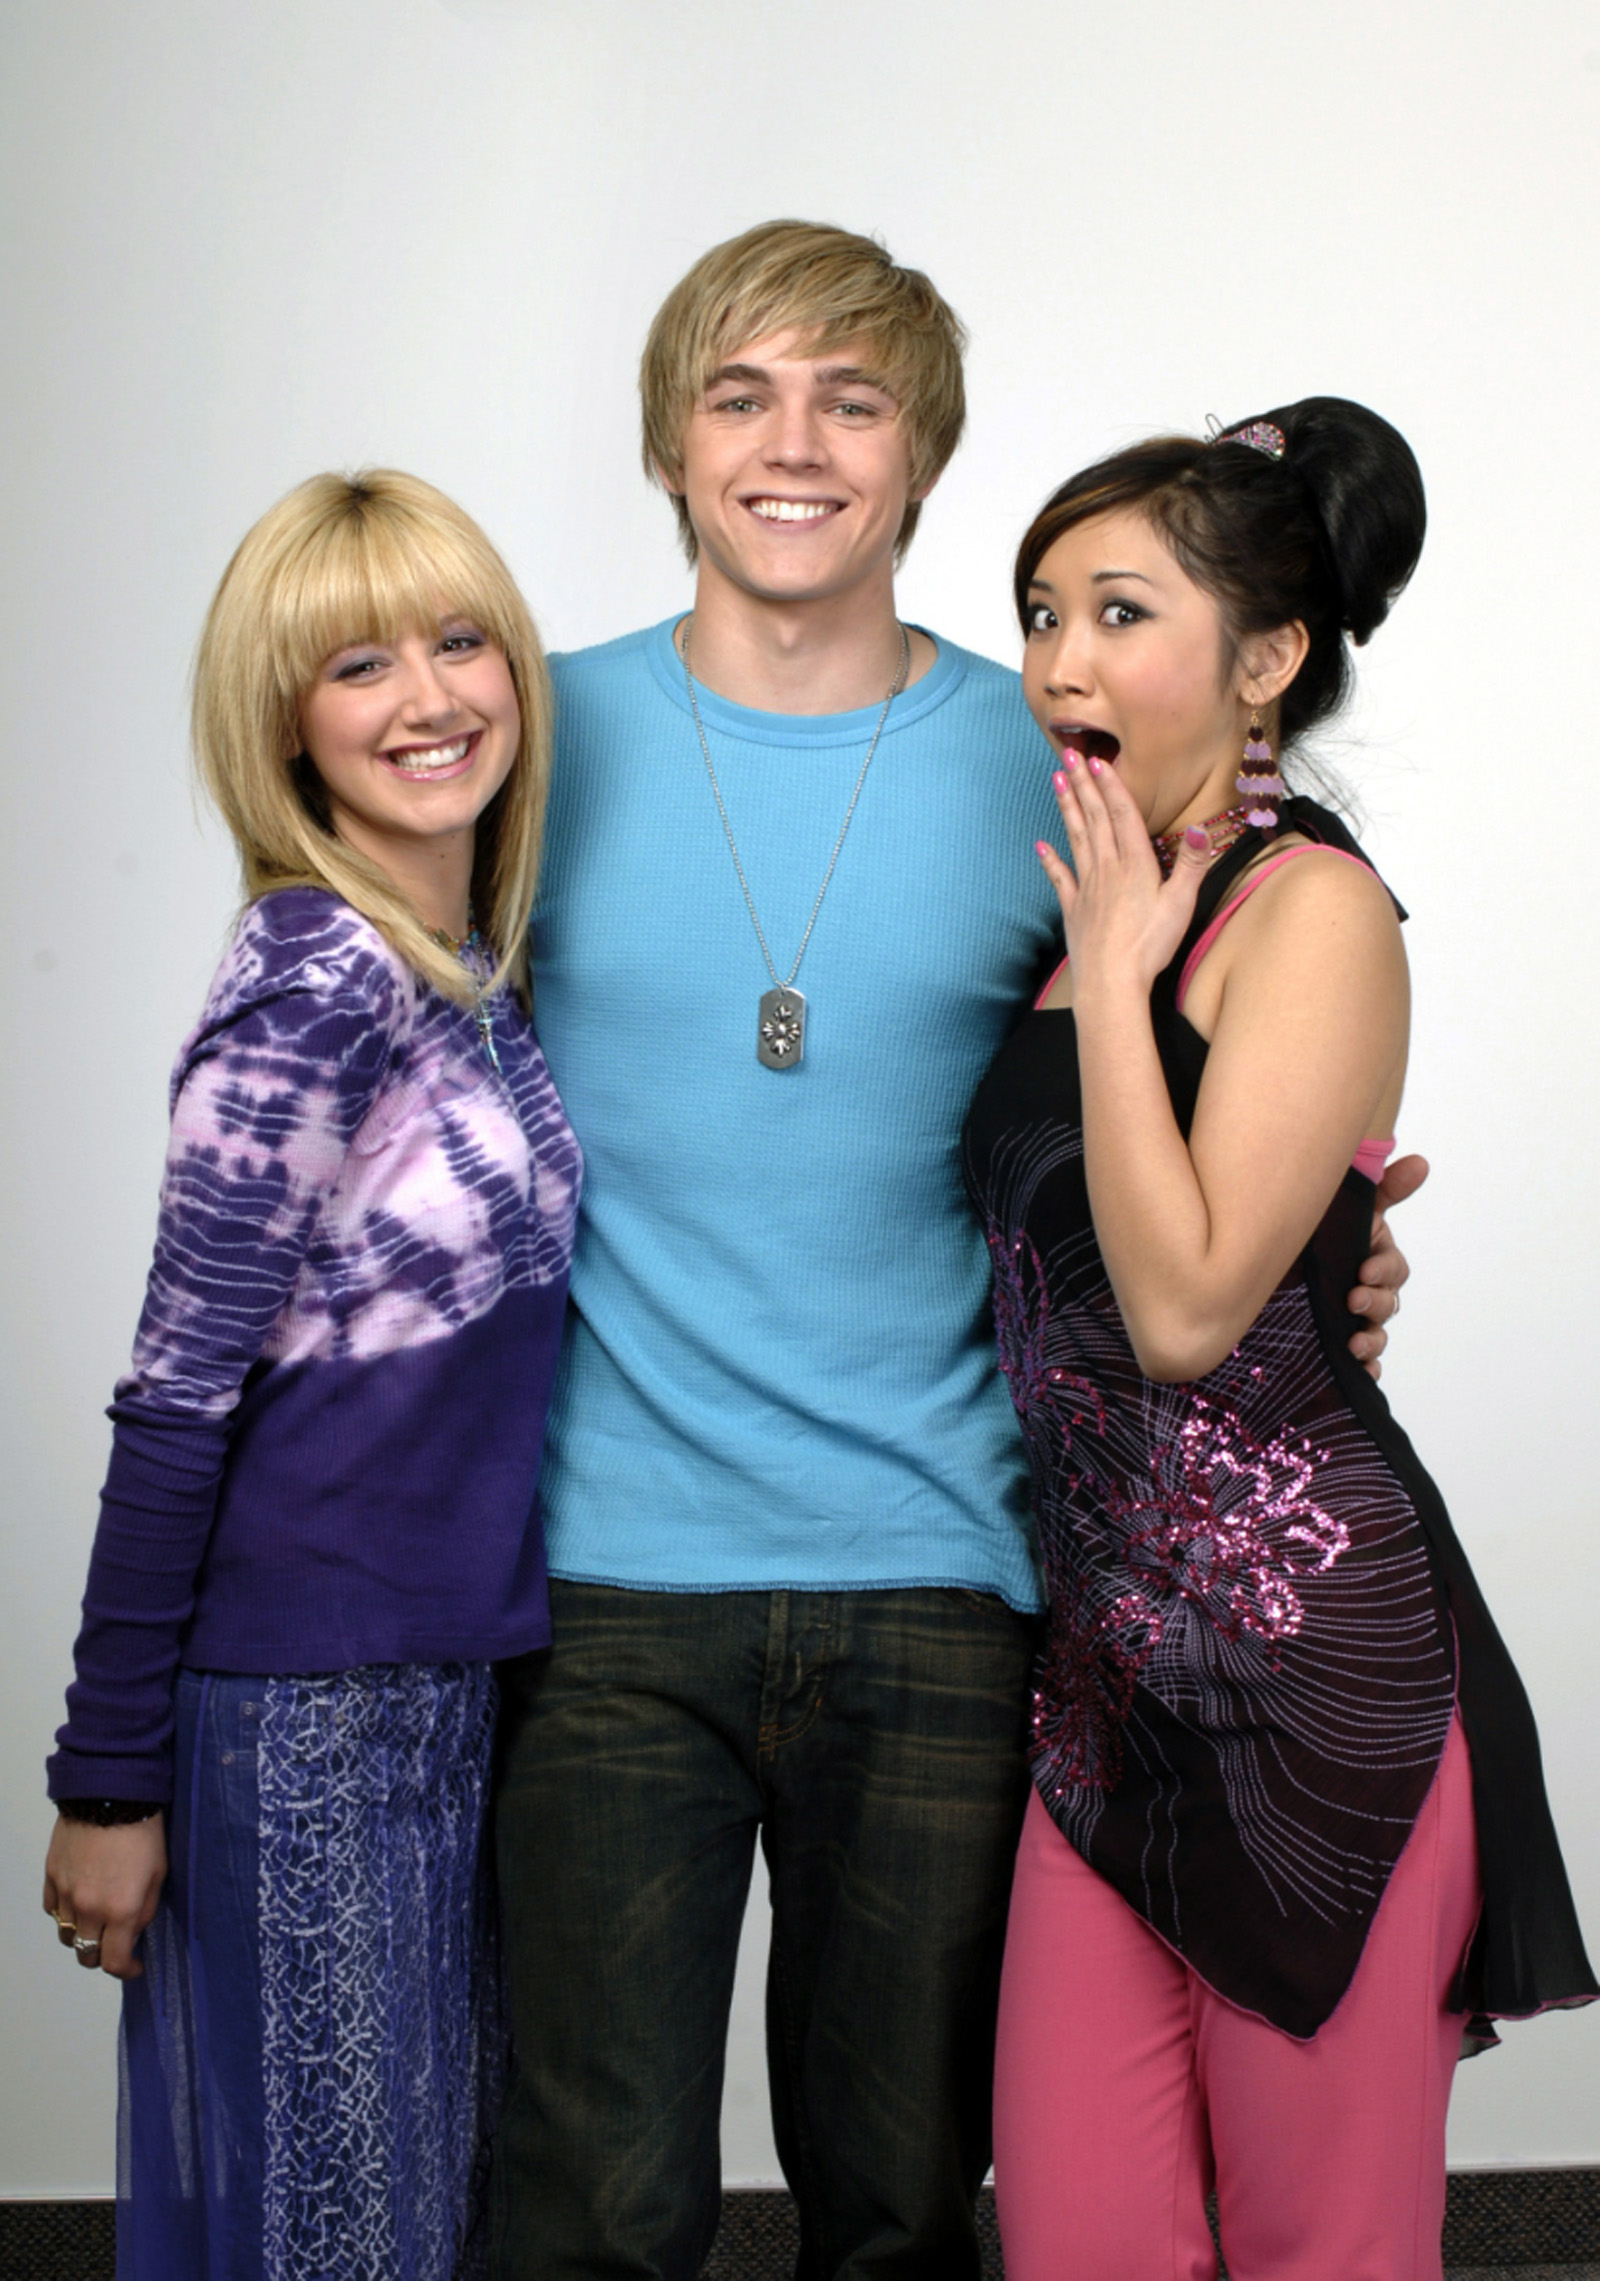 Jesse McCartney in The Suite Life of Zack and Cody, episode: Rock Star In The House